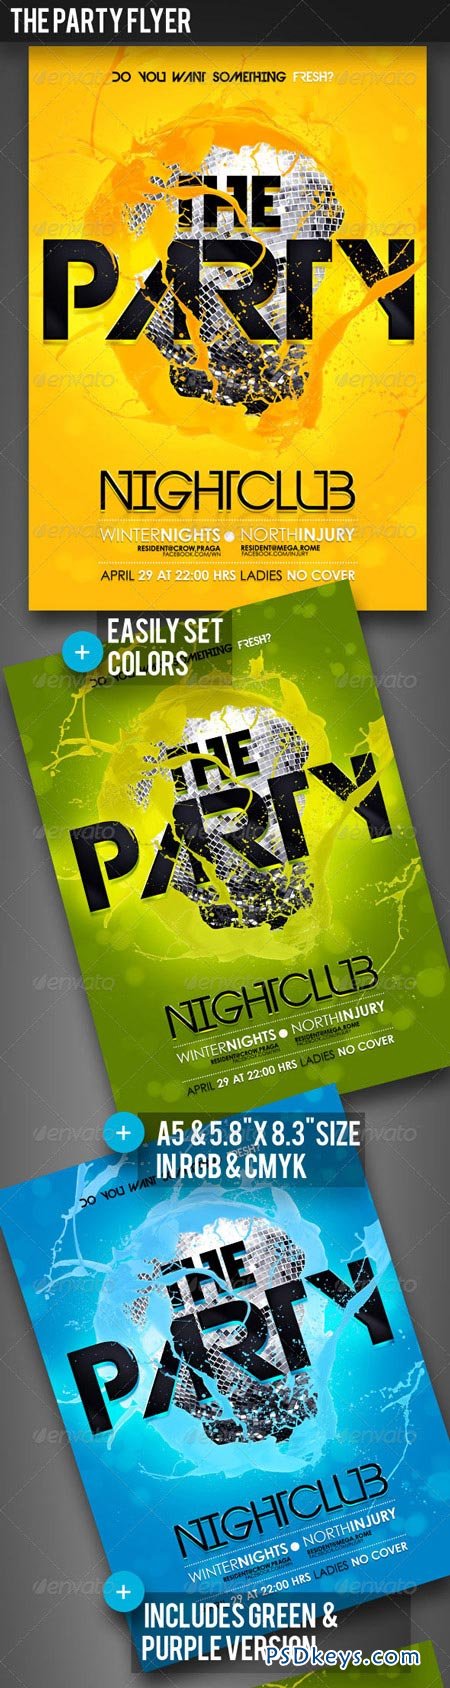 The Party Flyer 2215422